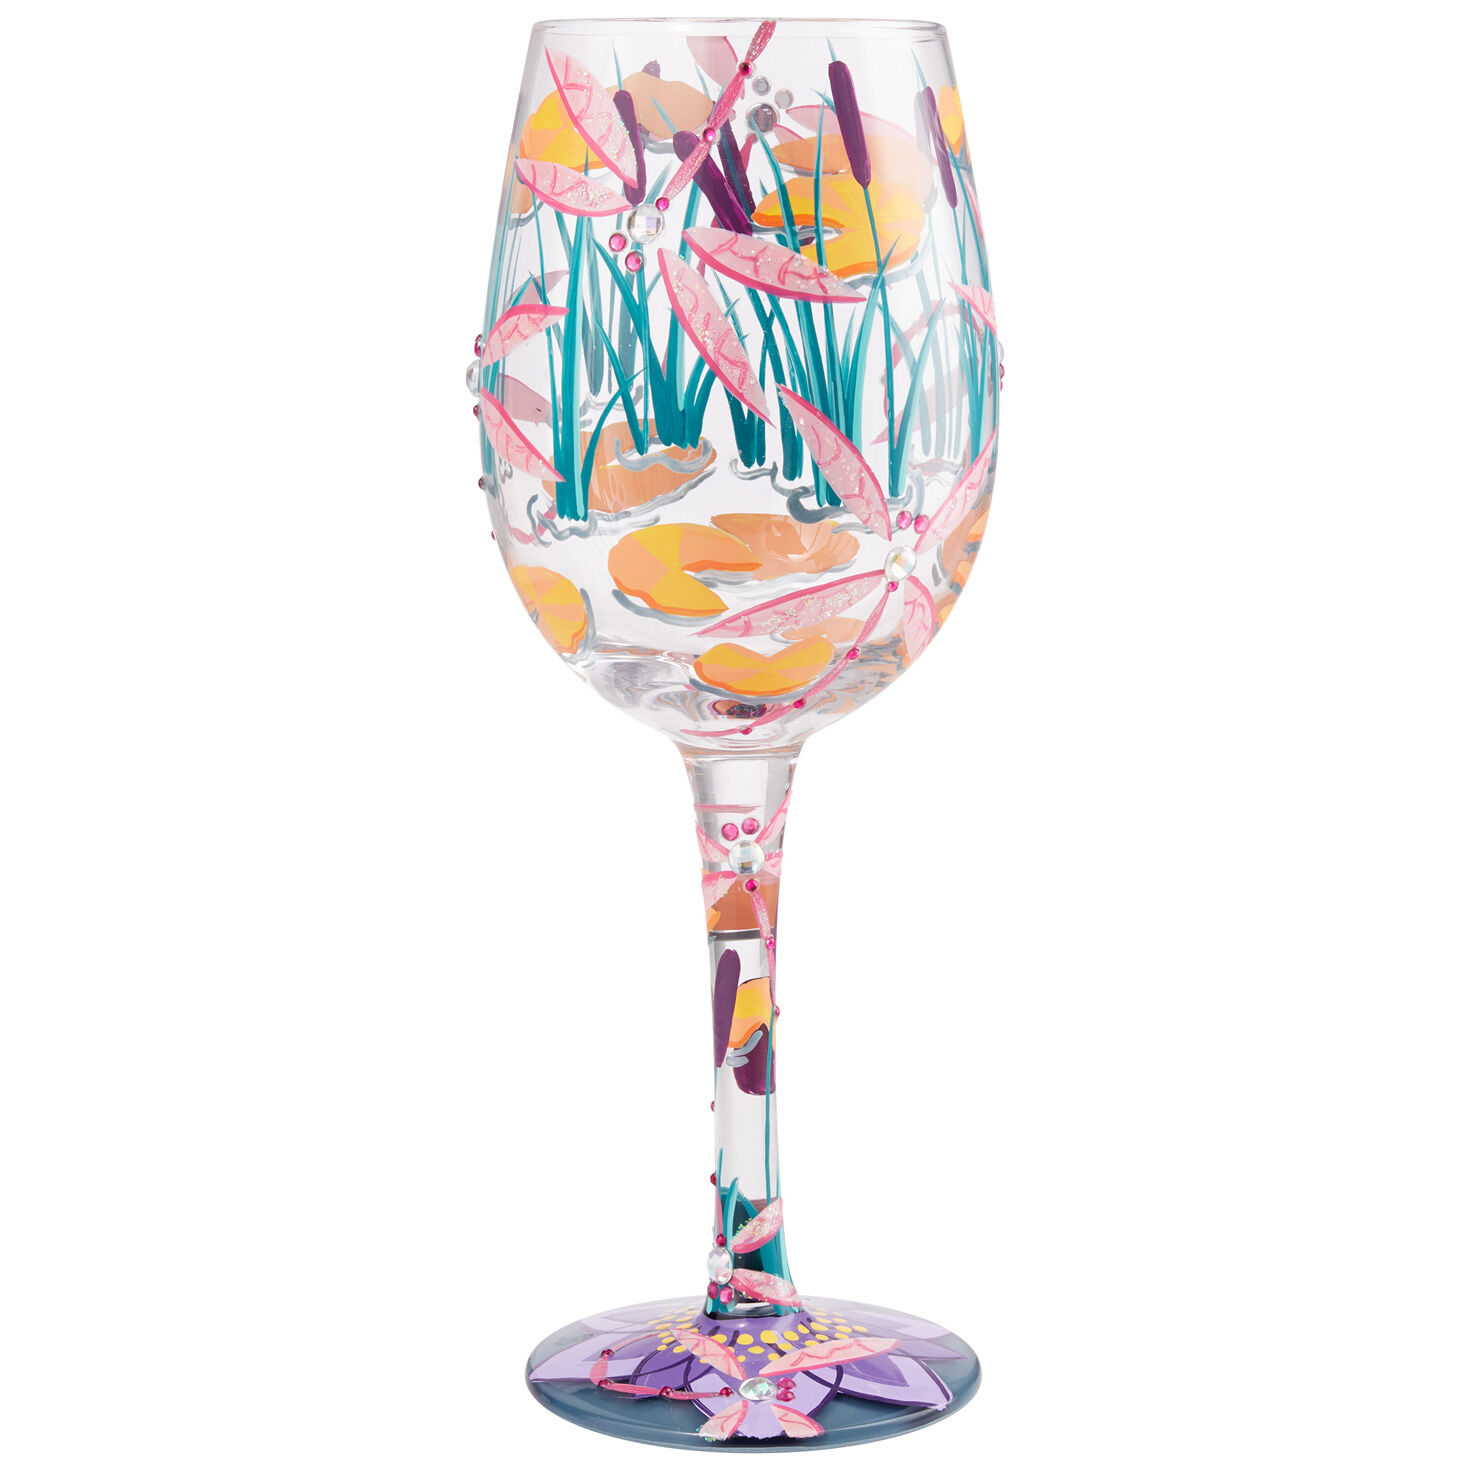 Lolita Dragonfly Hand Painted All Purpose Wine Glass 15oz in Branded Gift Box 